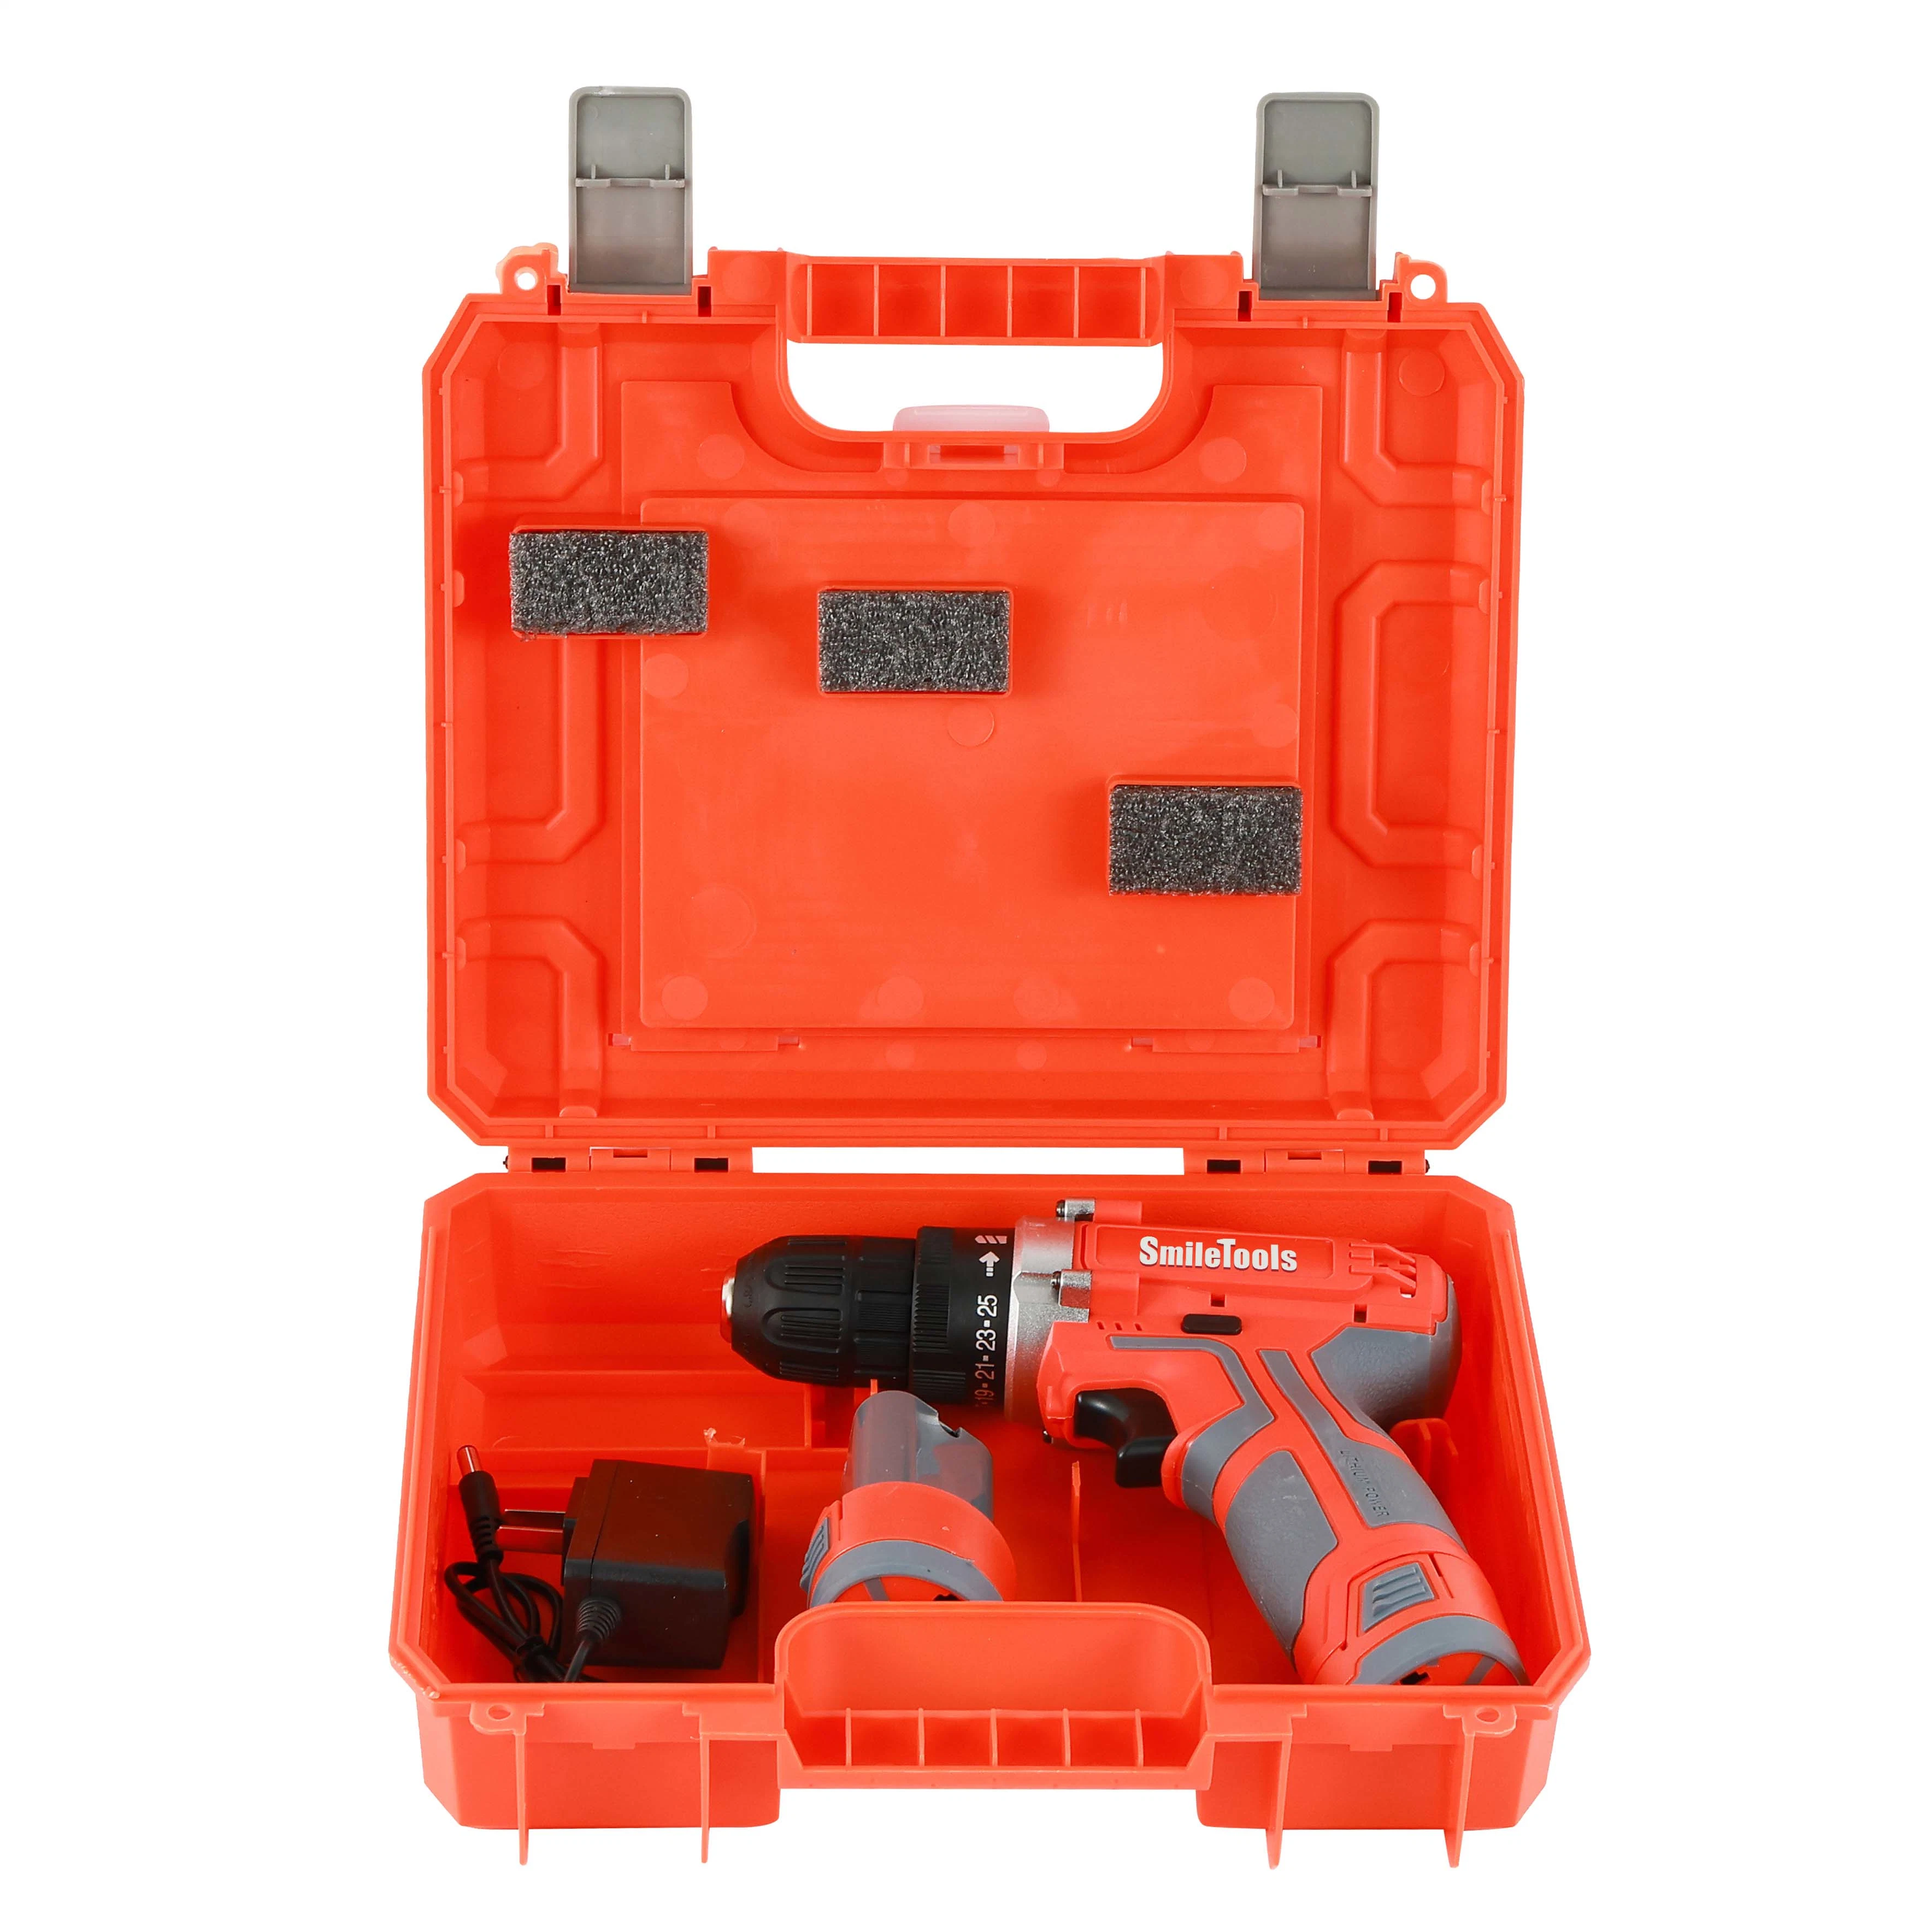 Best Selling Professional 21V 550W Electric Impact Drill Hand Impact Drill Household Power Tools